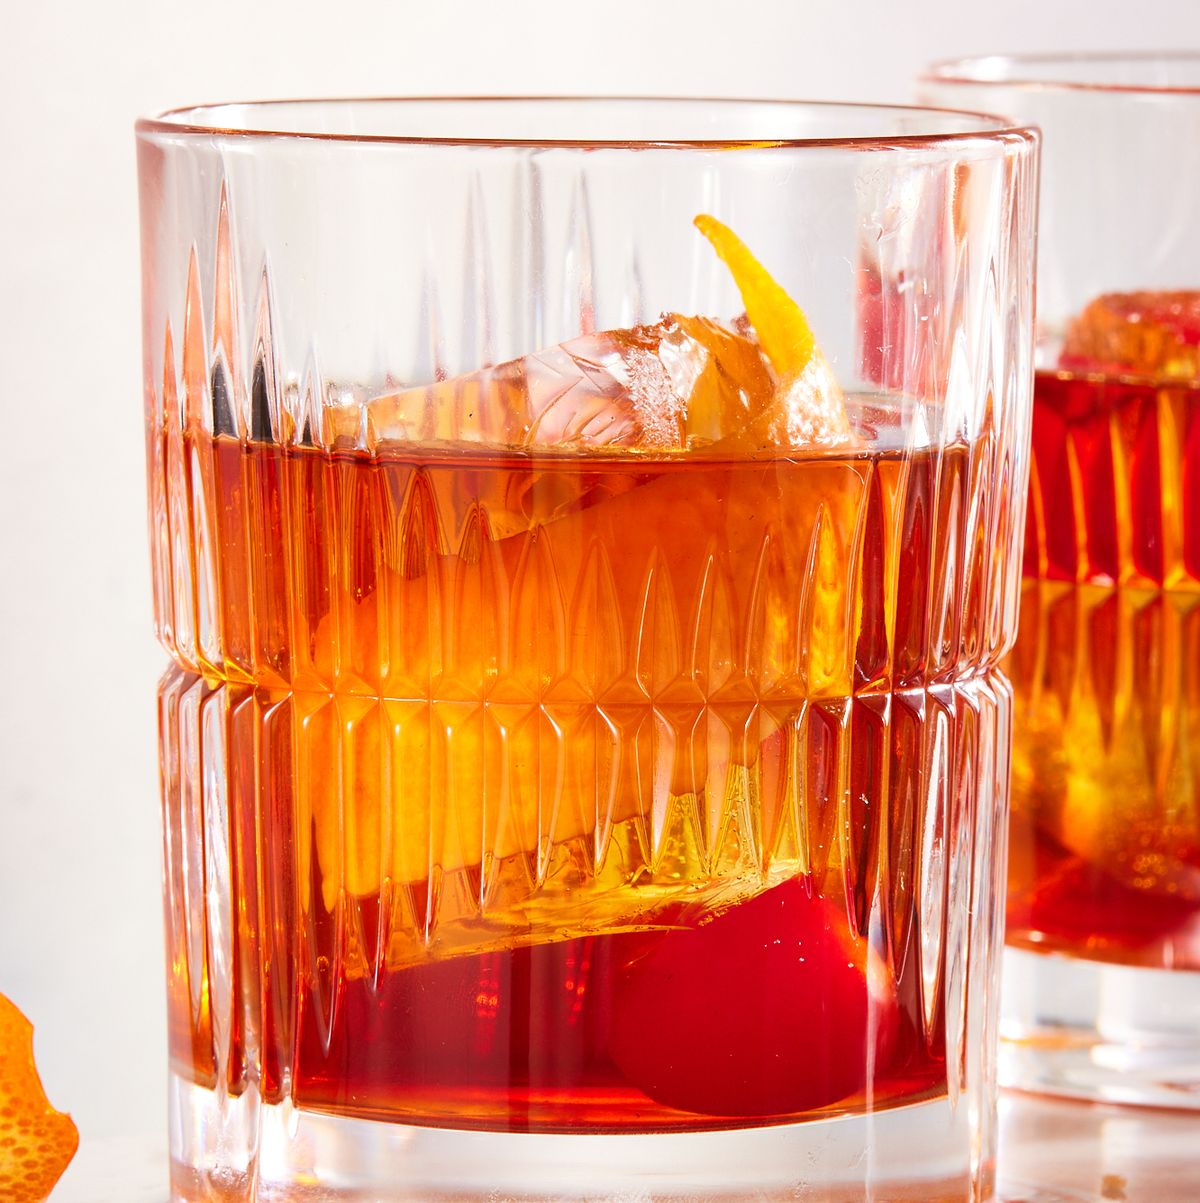 Best Old Fashioned Cocktail Recipe - How To Make A Classic Old